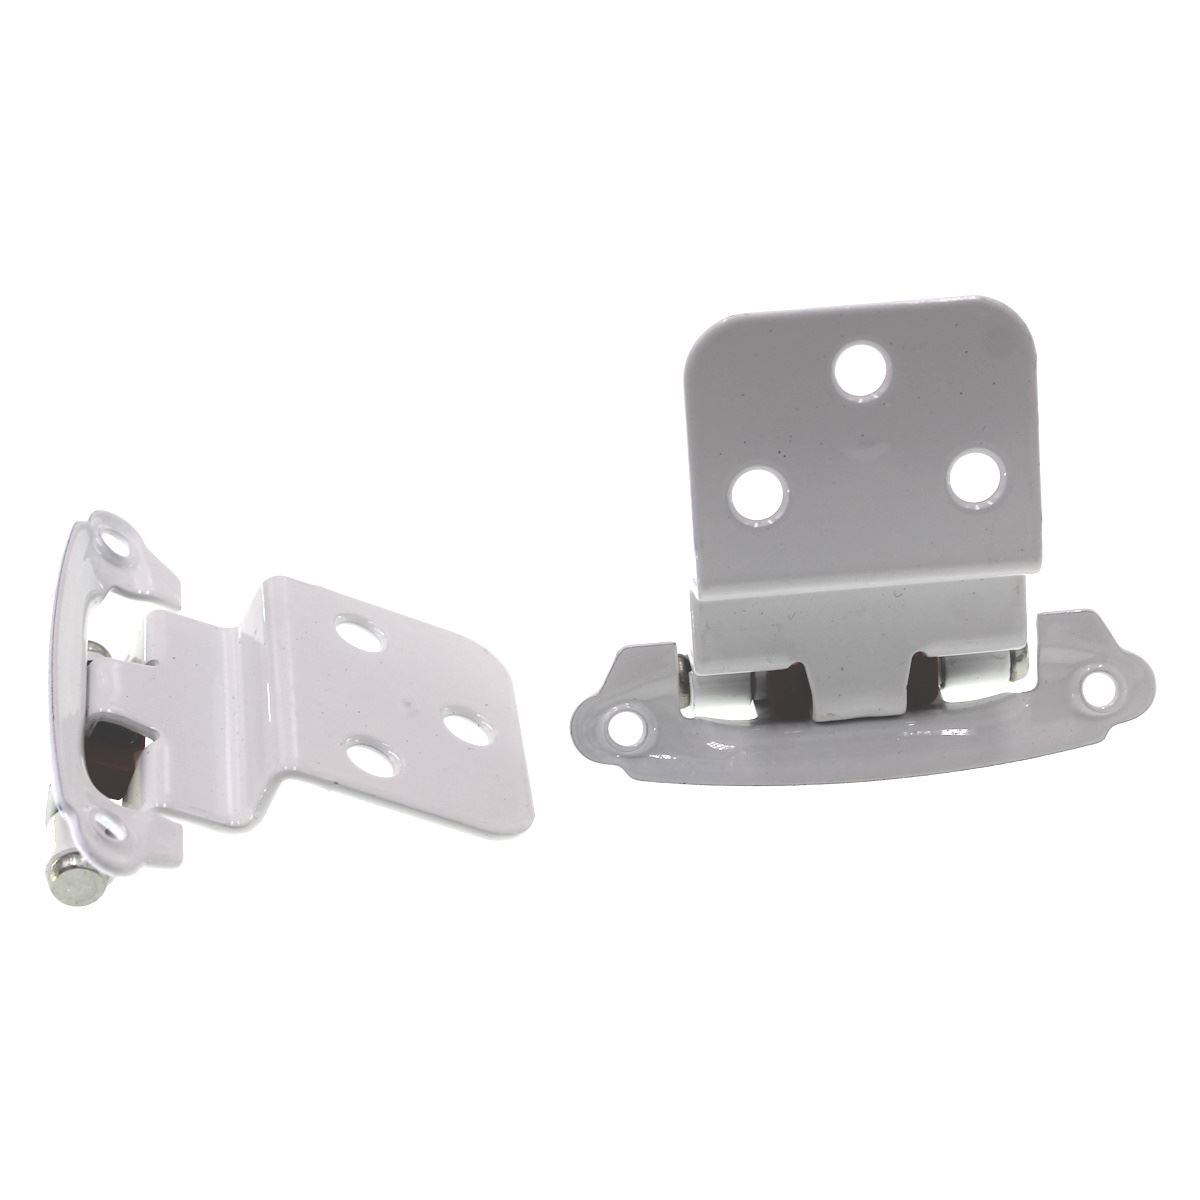 Pair of Belwith 3/8" Inset Hinges White With Chrome Tip P50030F-A4